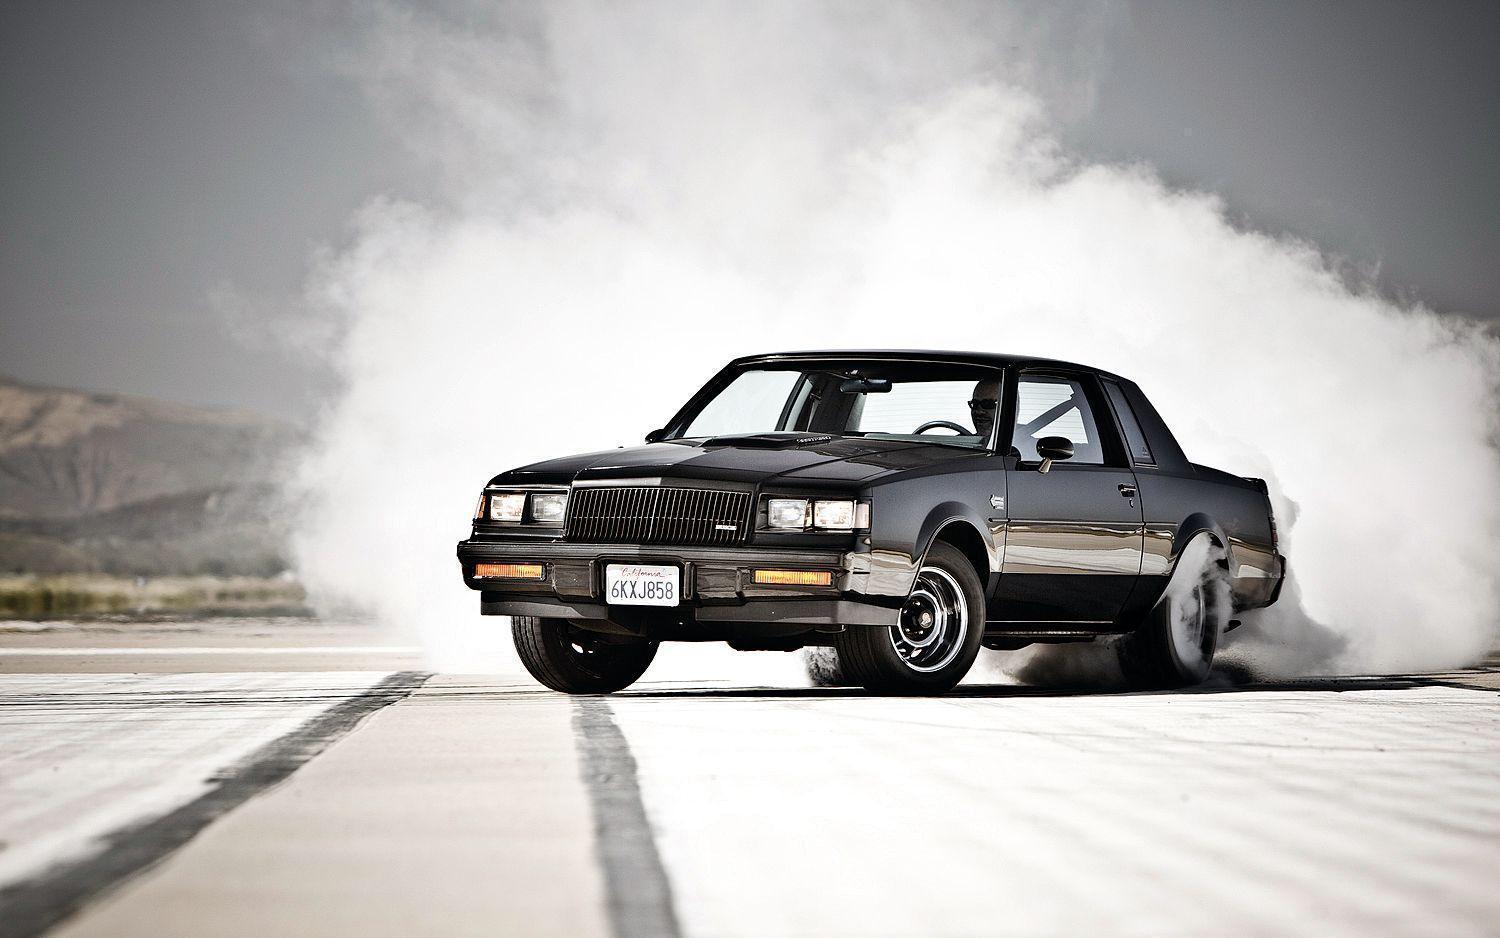 Best image about g body. Buick grand national